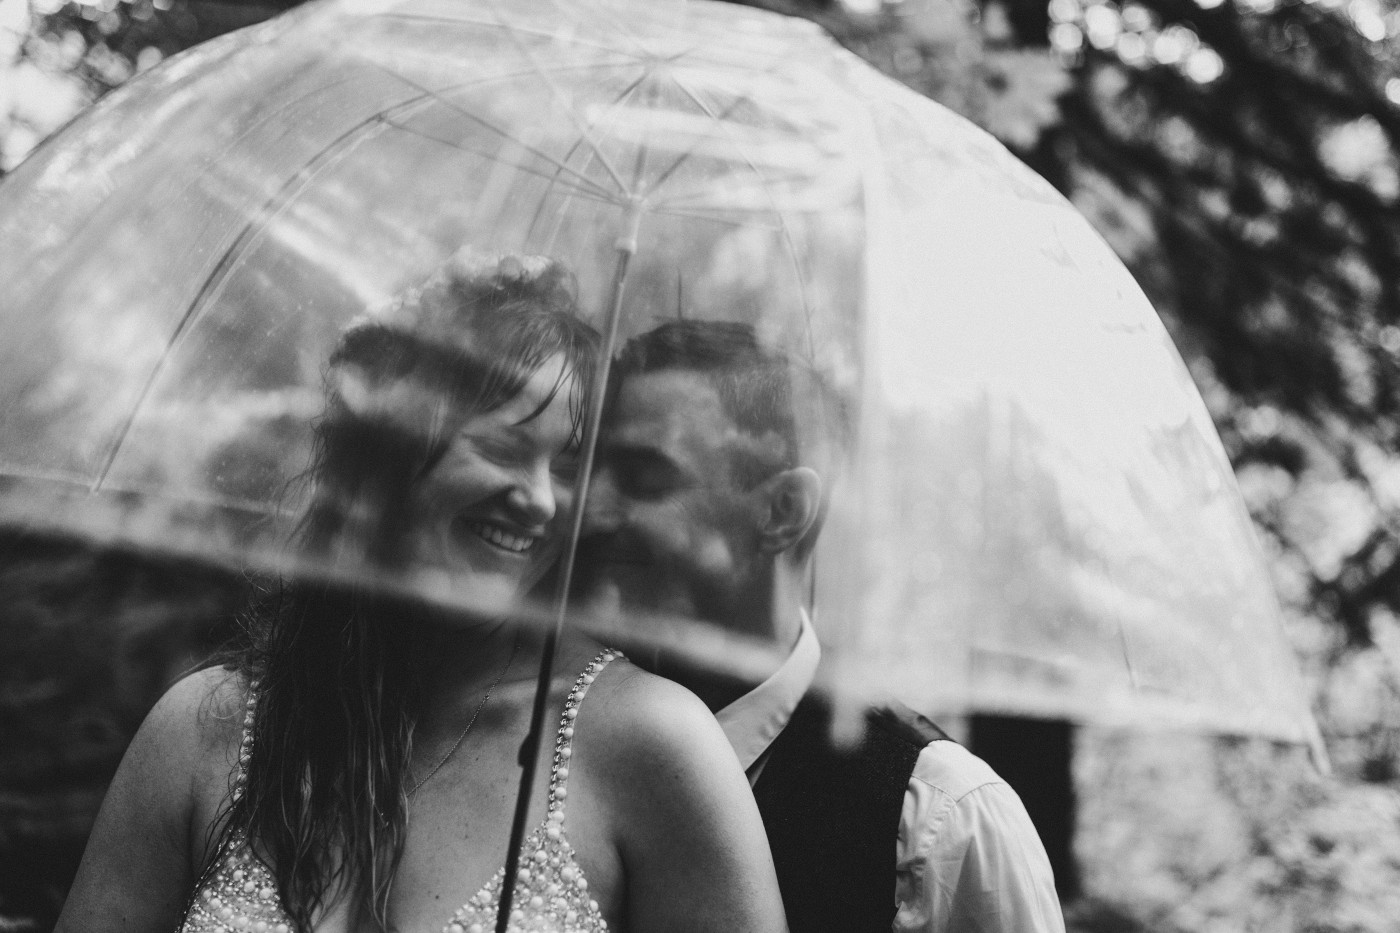 Jordan and Andrew smile while standing under an umbrella.